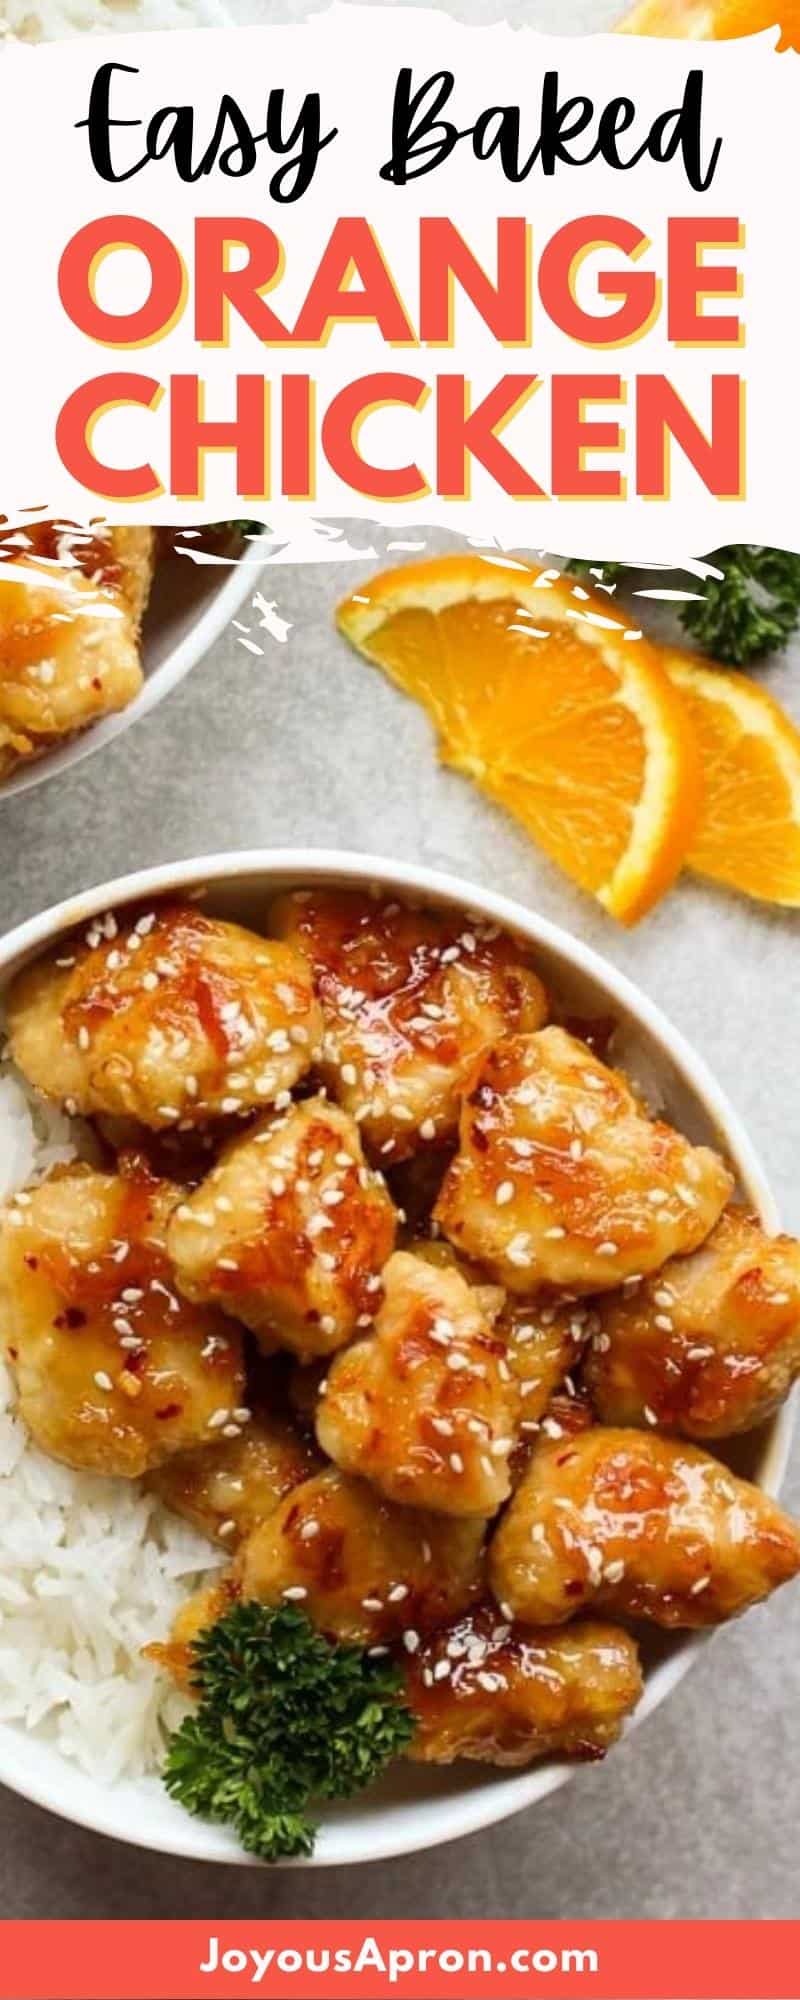 Easy Baked Orange Chicken - A lighter, healthier and just as delicious version of Orange Chicken, the classic Asian American Chinese dish! Baked, not fried - this is a quick and simple meal for weeknight dinners! Serve well with rice. via @joyousapron